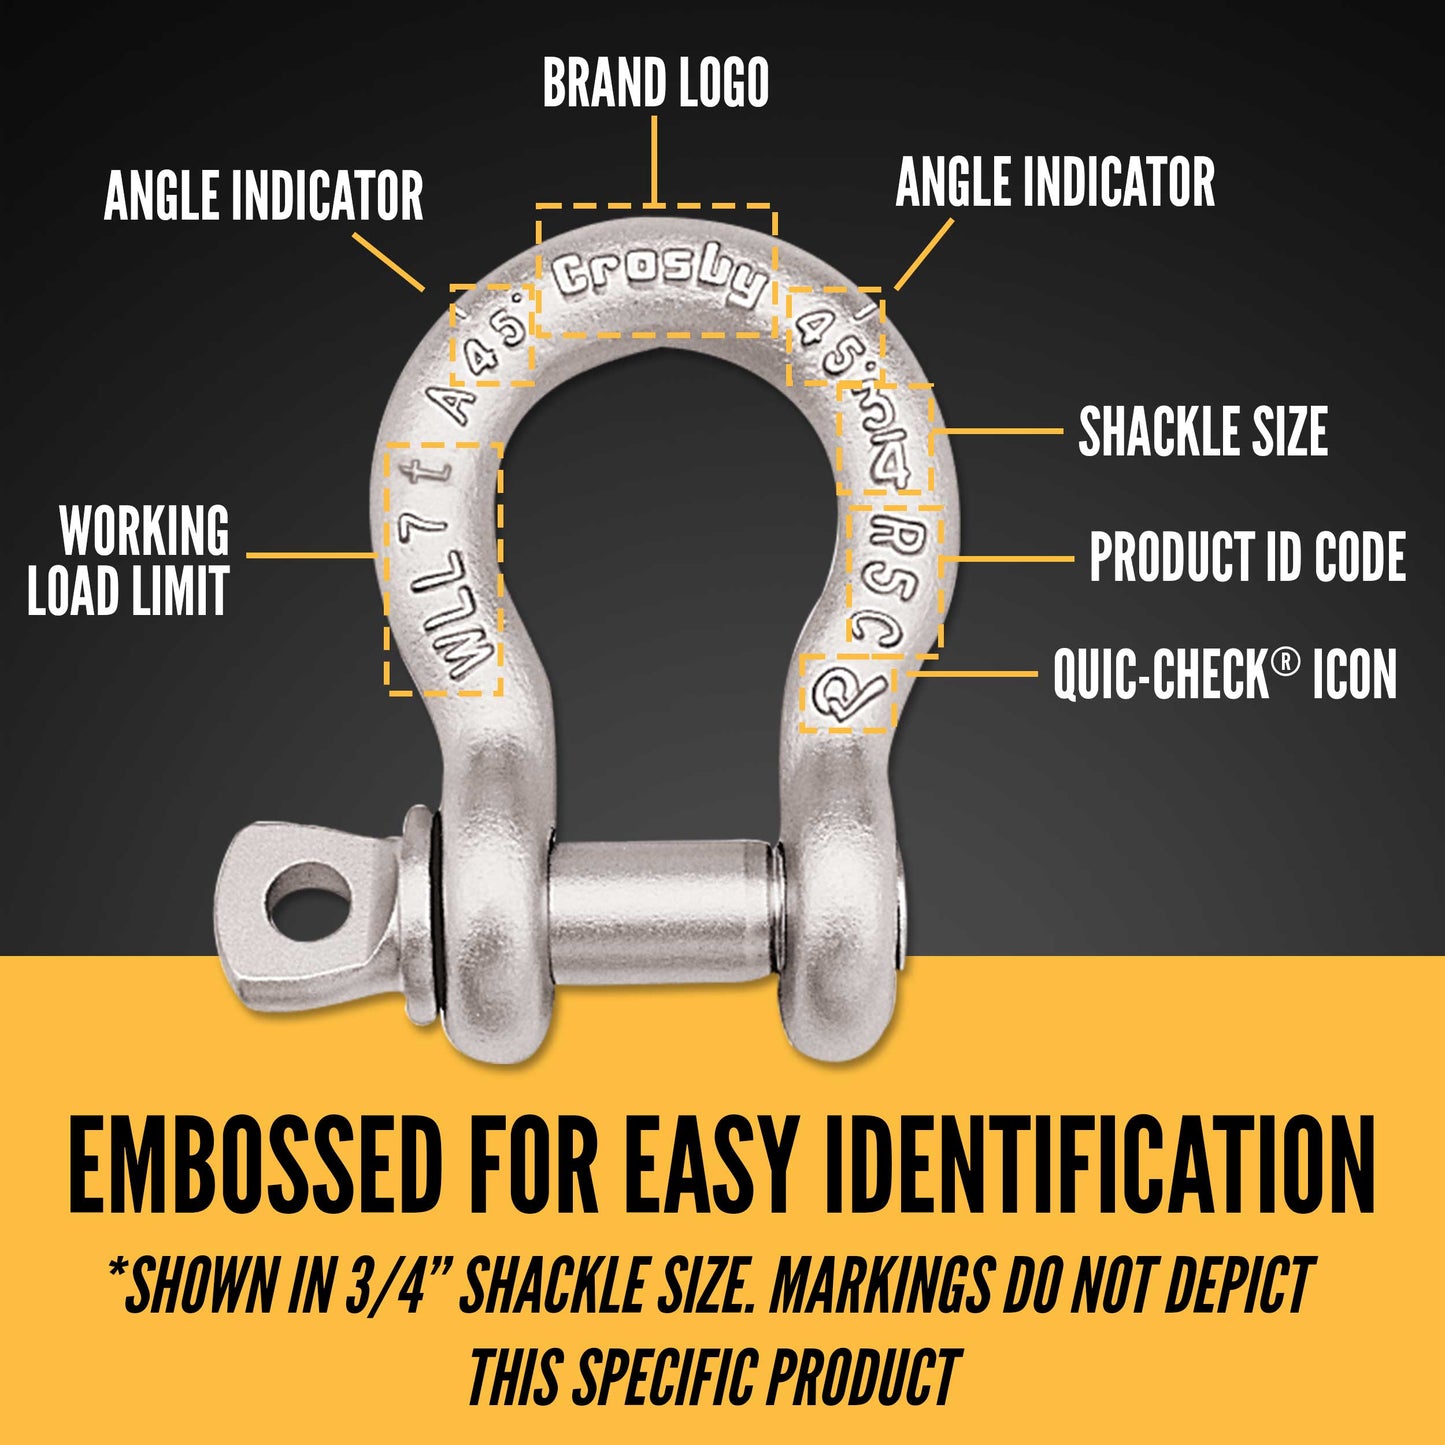 3/4" Crosby® Alloy Screw Pin Anchor Shackle | G-209A - 7 Ton embossed for easy identification